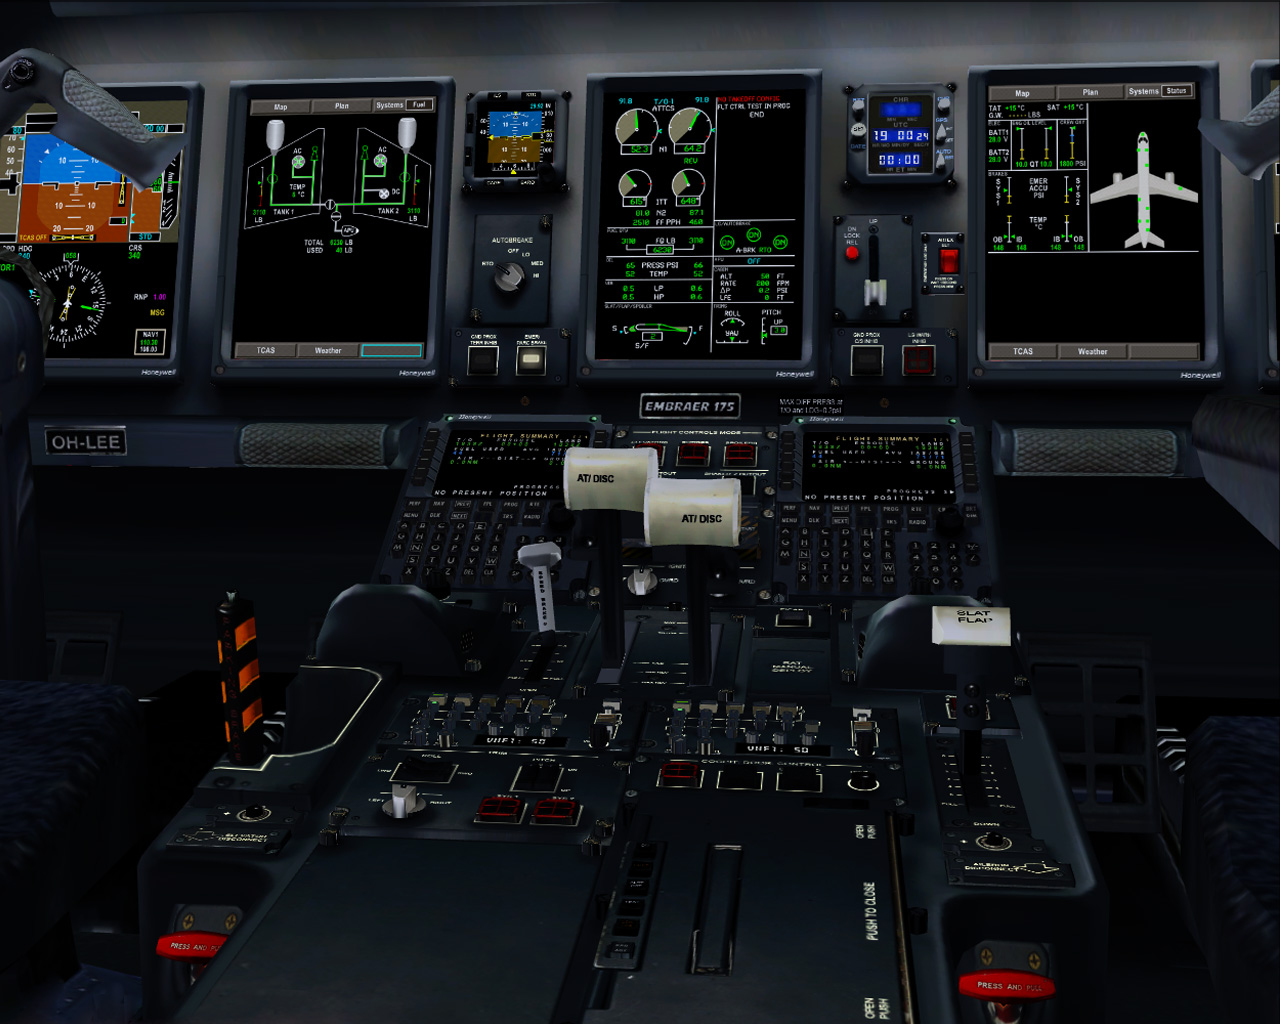 feelthere embraer 175